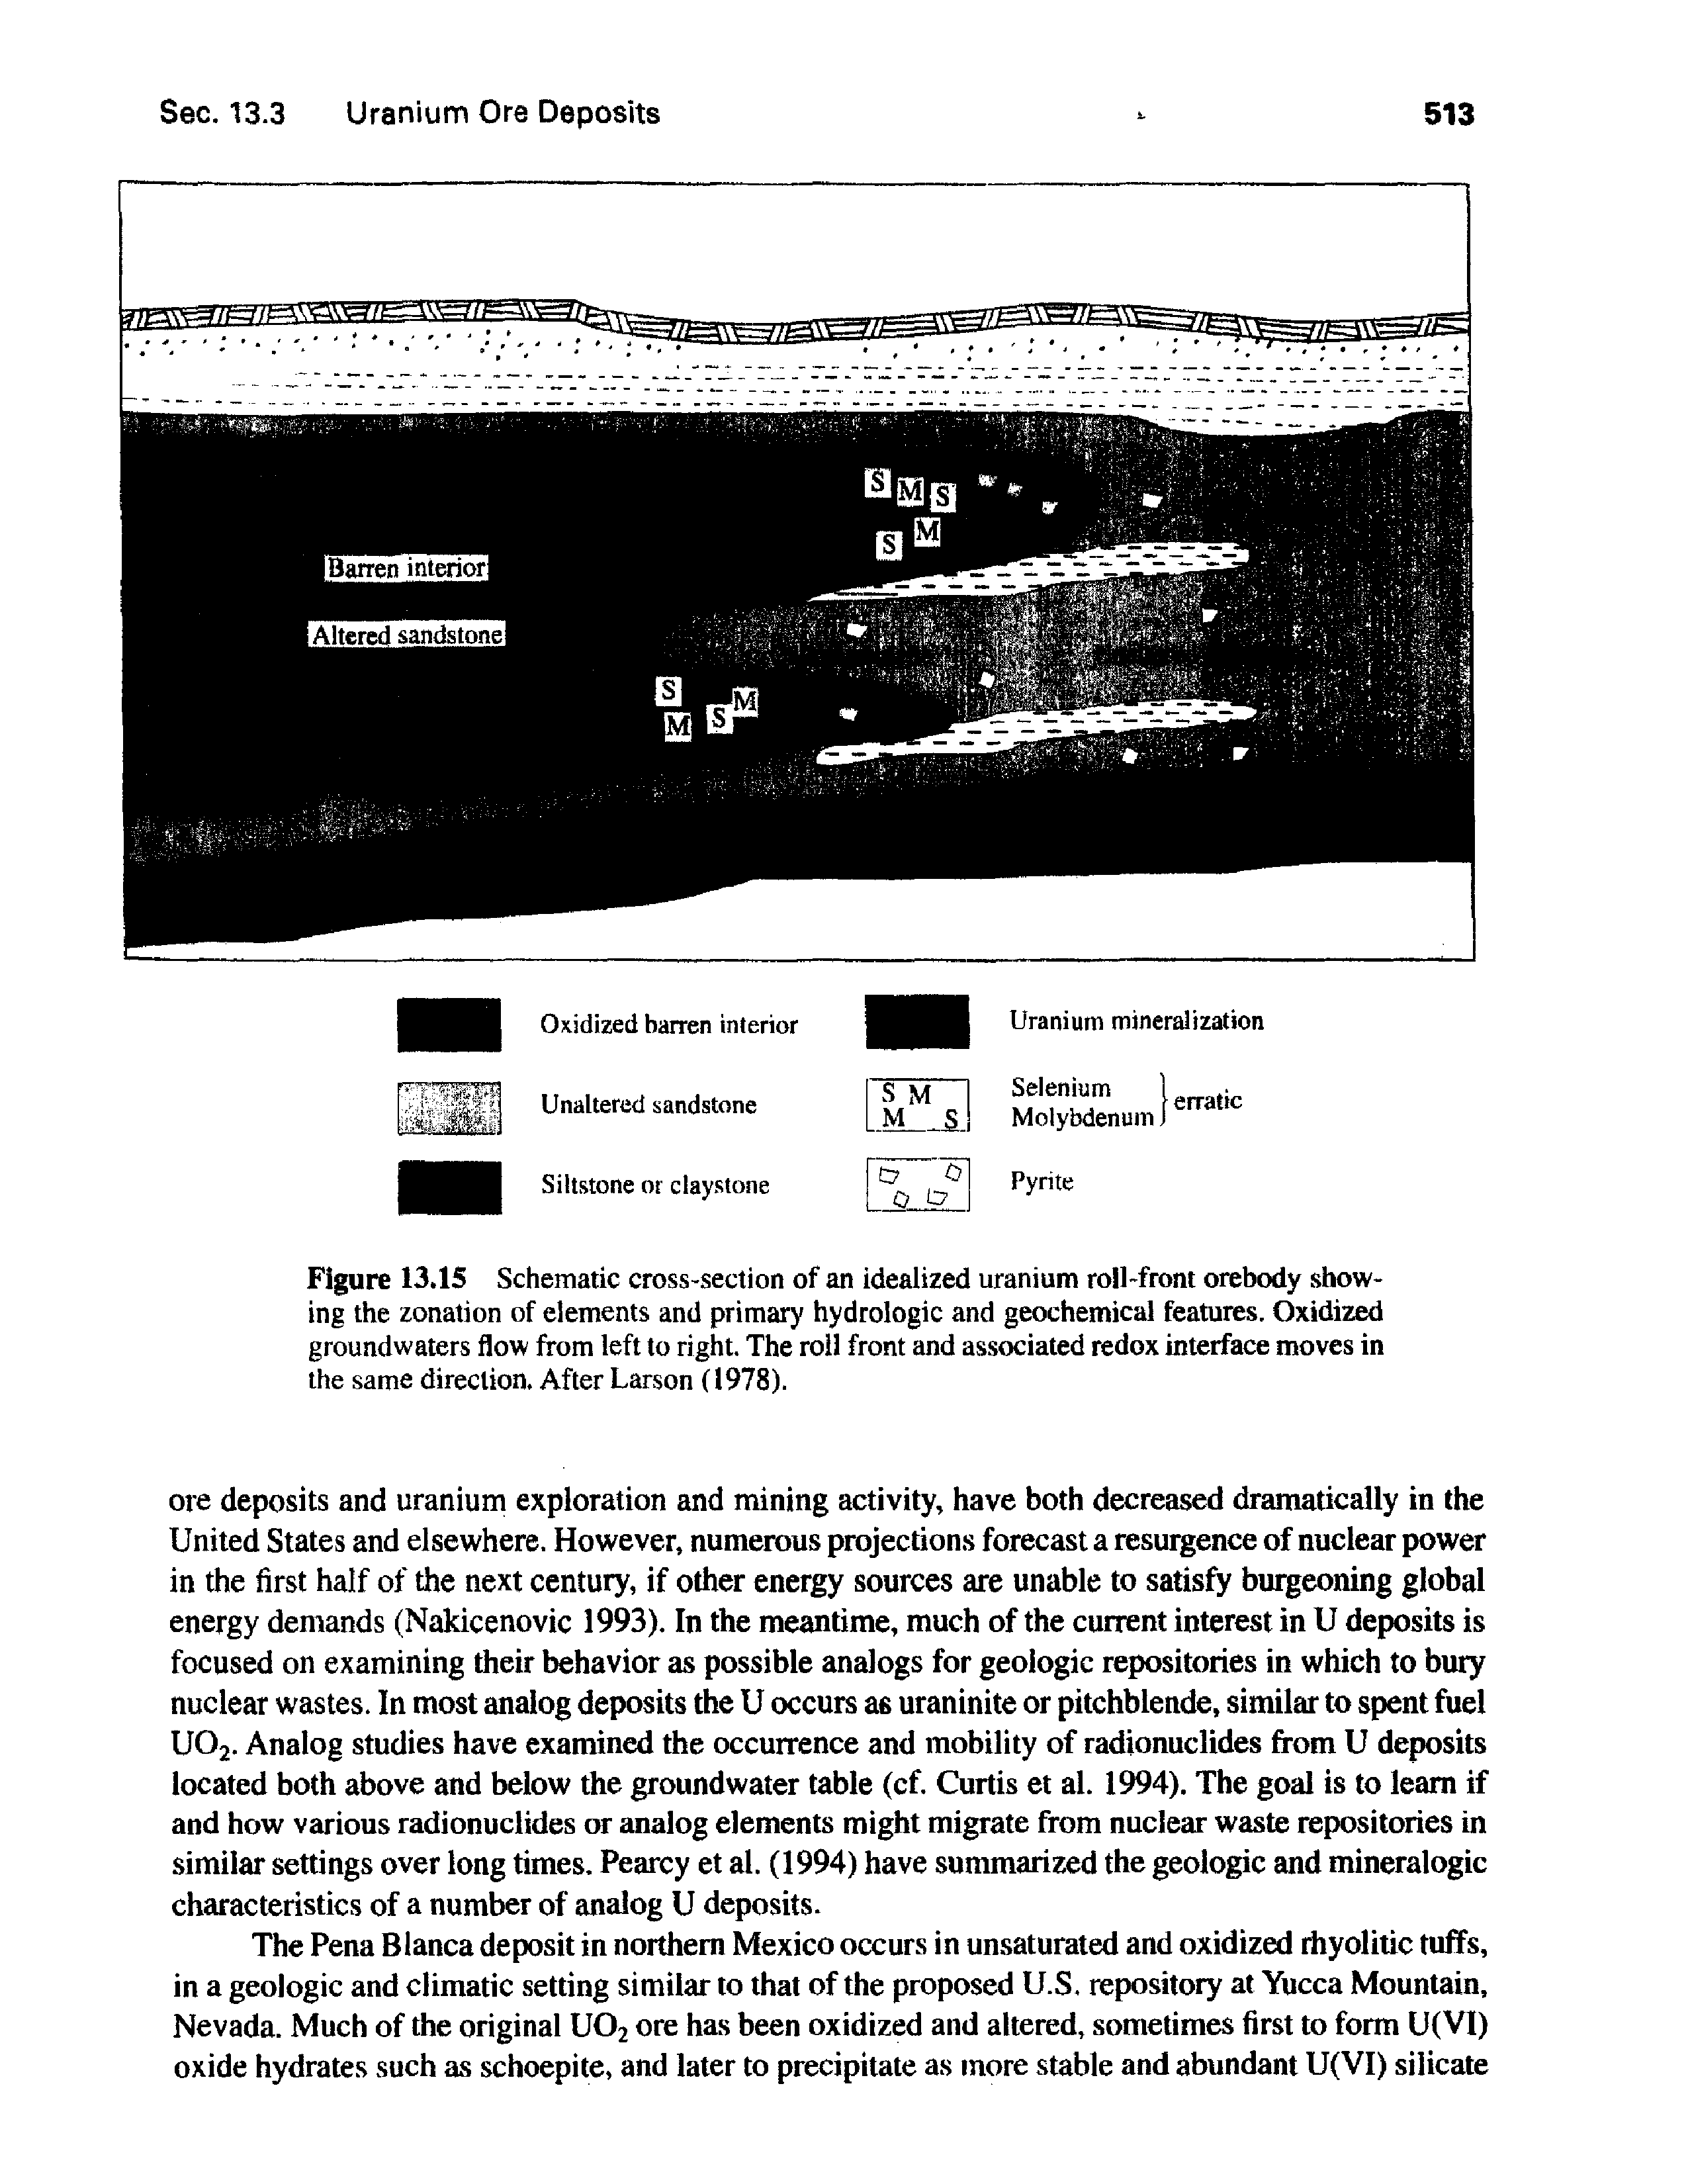 Figure 13.15 Schematic cross-section of an idealized uranium roll-front orebody showing the zonation of elements and primary hydrologic and geochemical features. Oxidized groundwaters flow from left to right. The roll front and associated redox interface moves in the same direction. After Larson (1978).